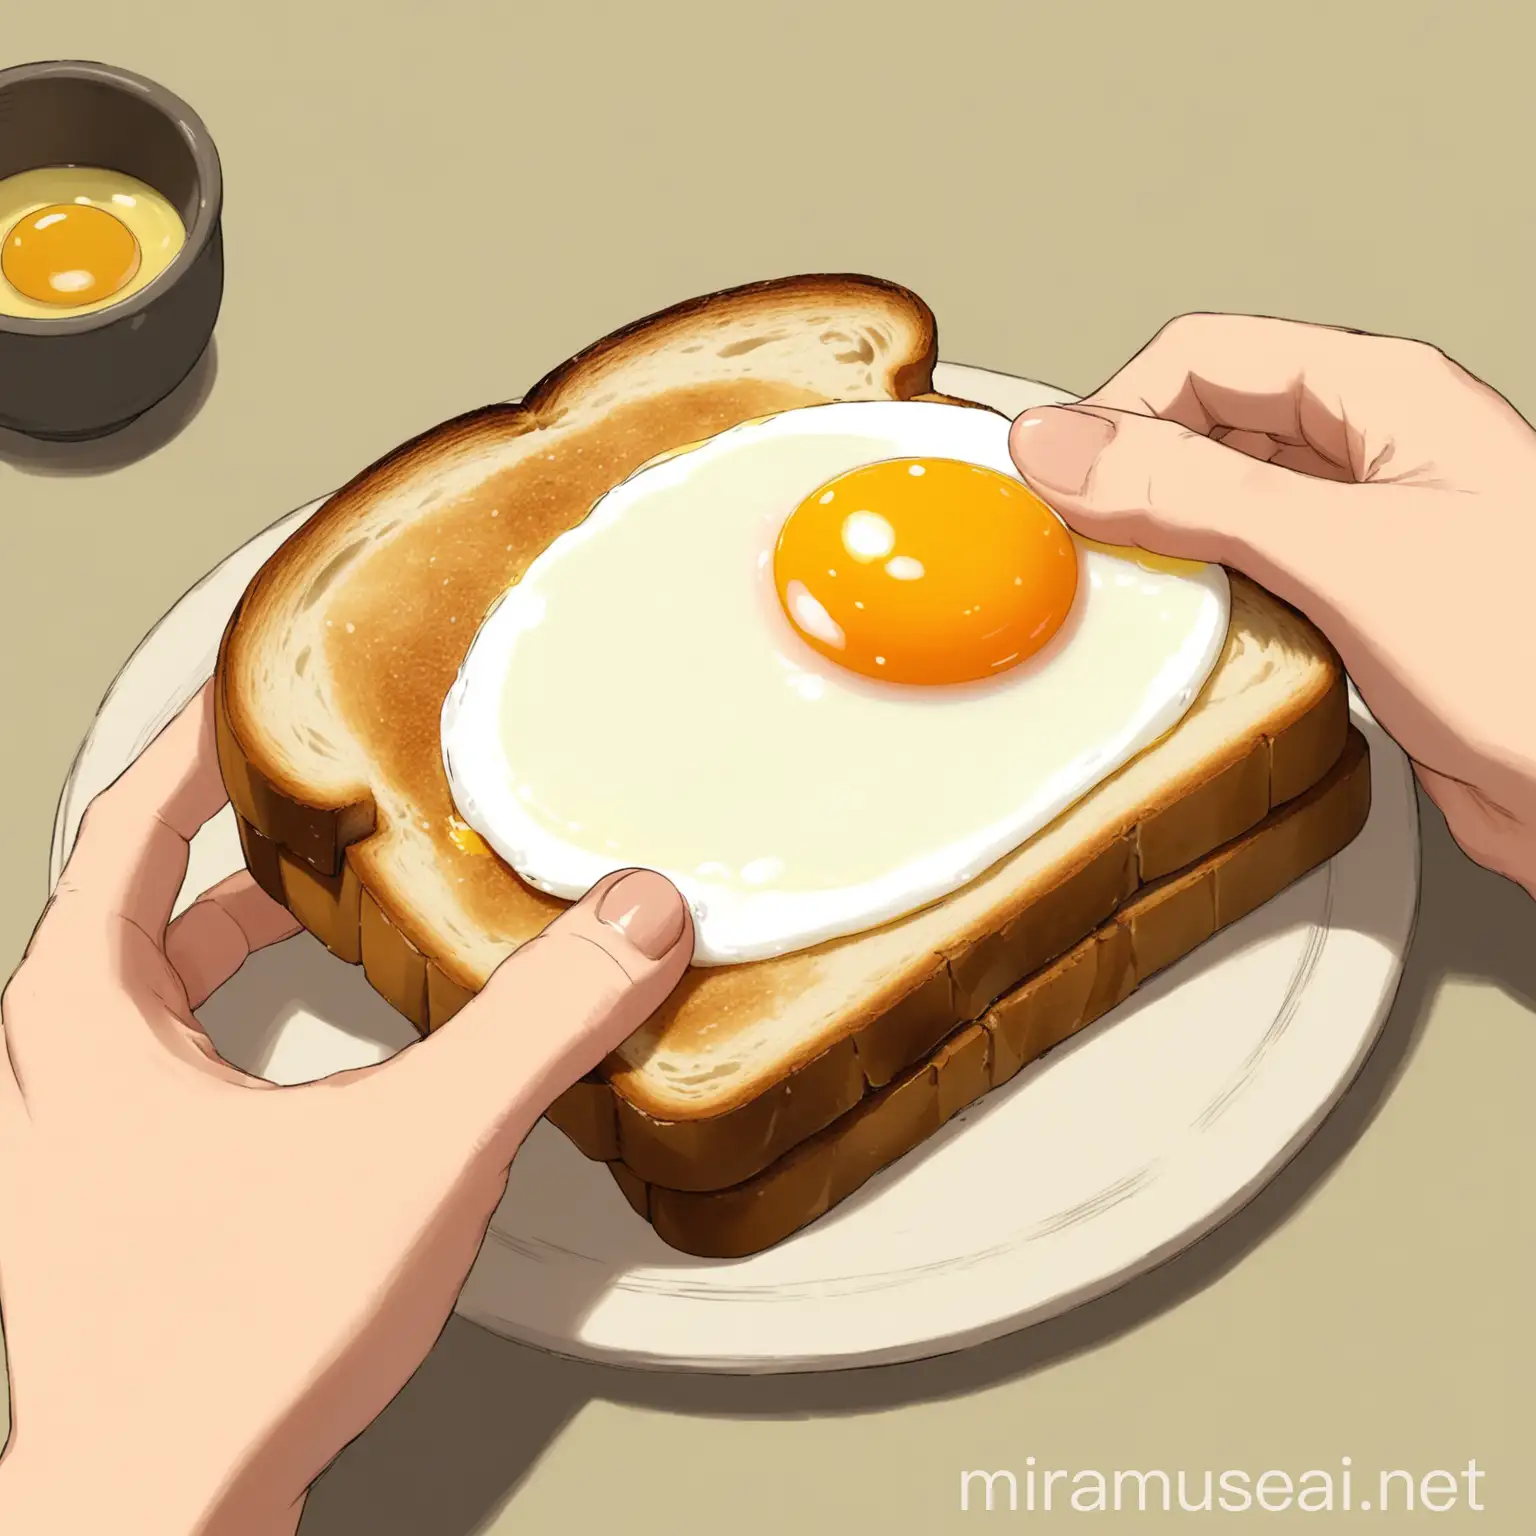 Ghibli Style Art Hands Holding Toast with Egg